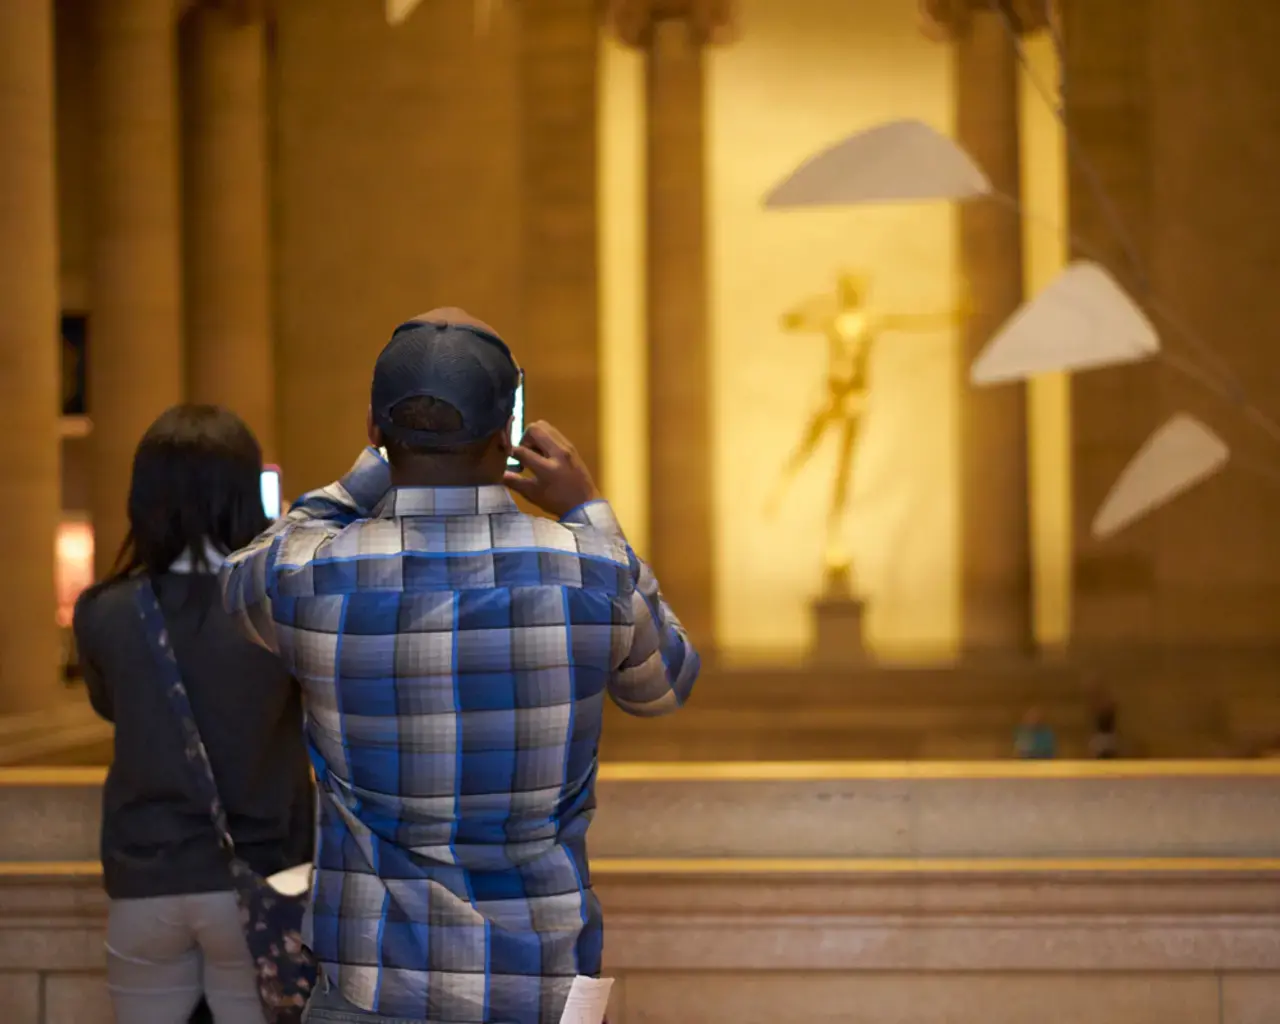 Art After 5 at the Philadelphia Museum of Art, 2014. Photo by Elizabeth Leitzell.